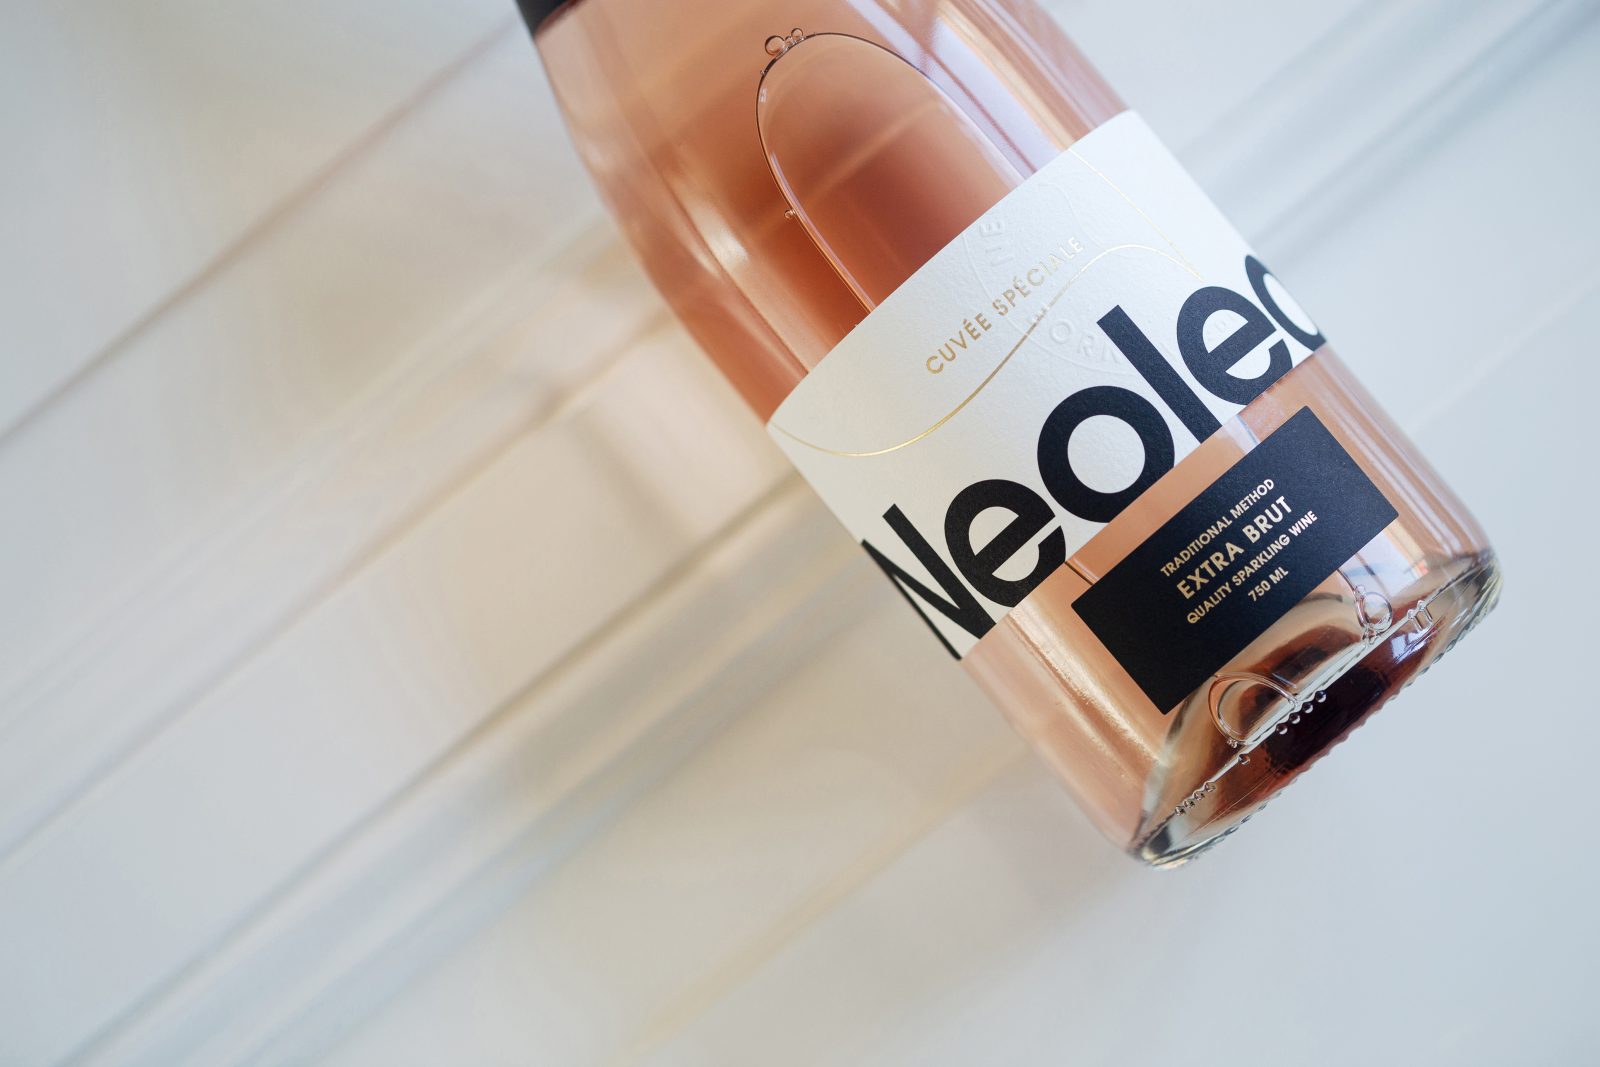 Neolea Brand and Packaging Design